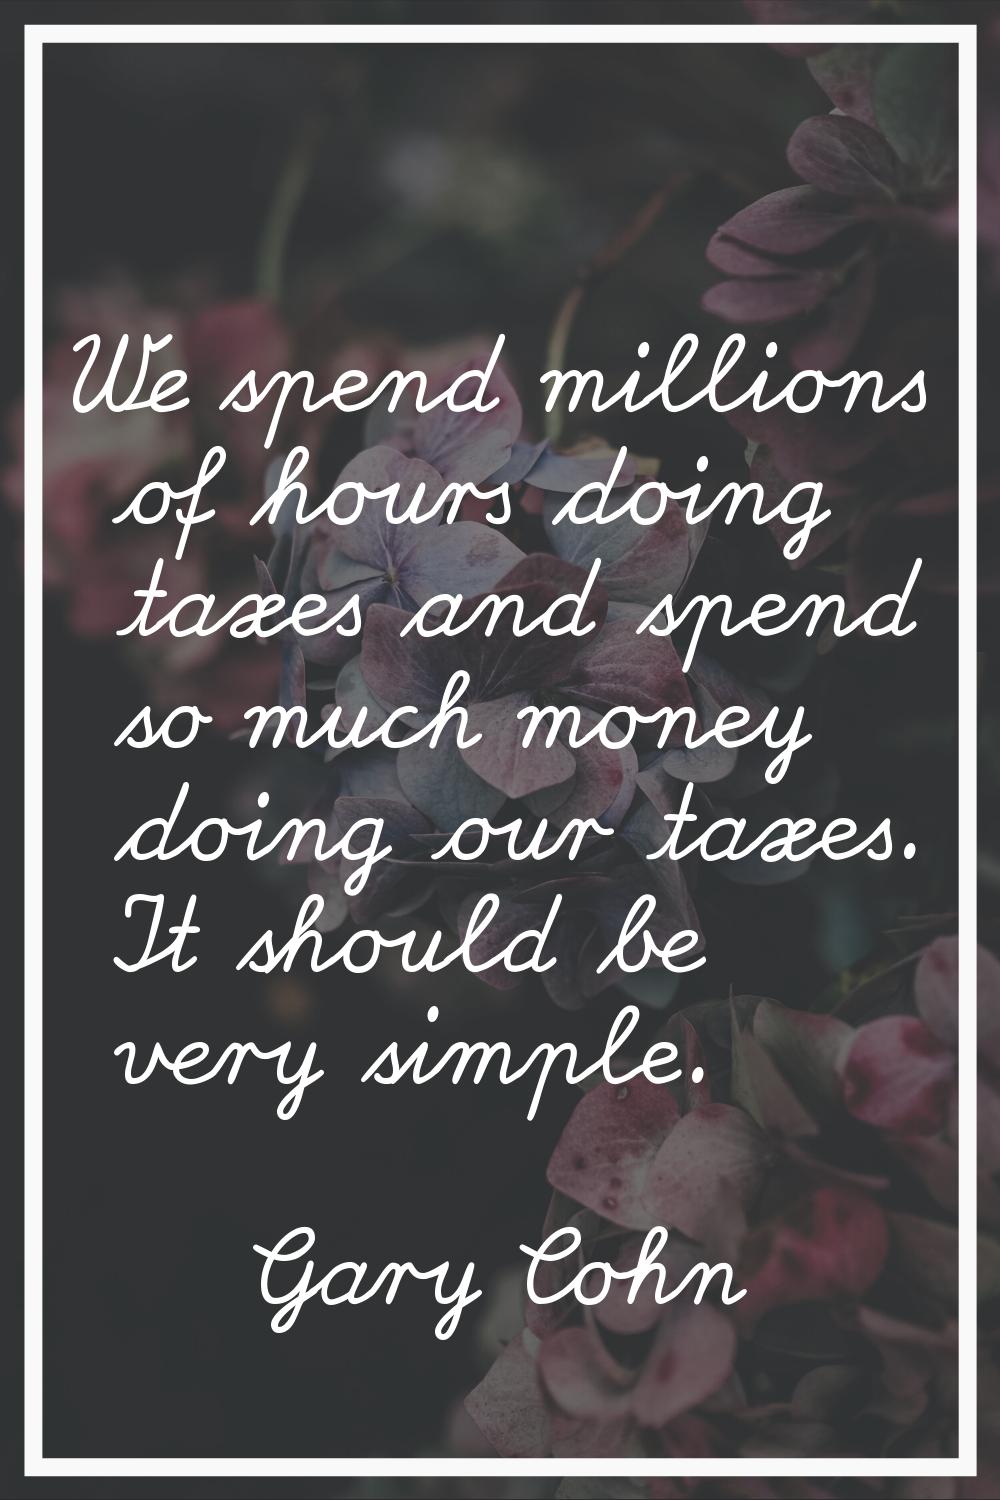 We spend millions of hours doing taxes and spend so much money doing our taxes. It should be very s